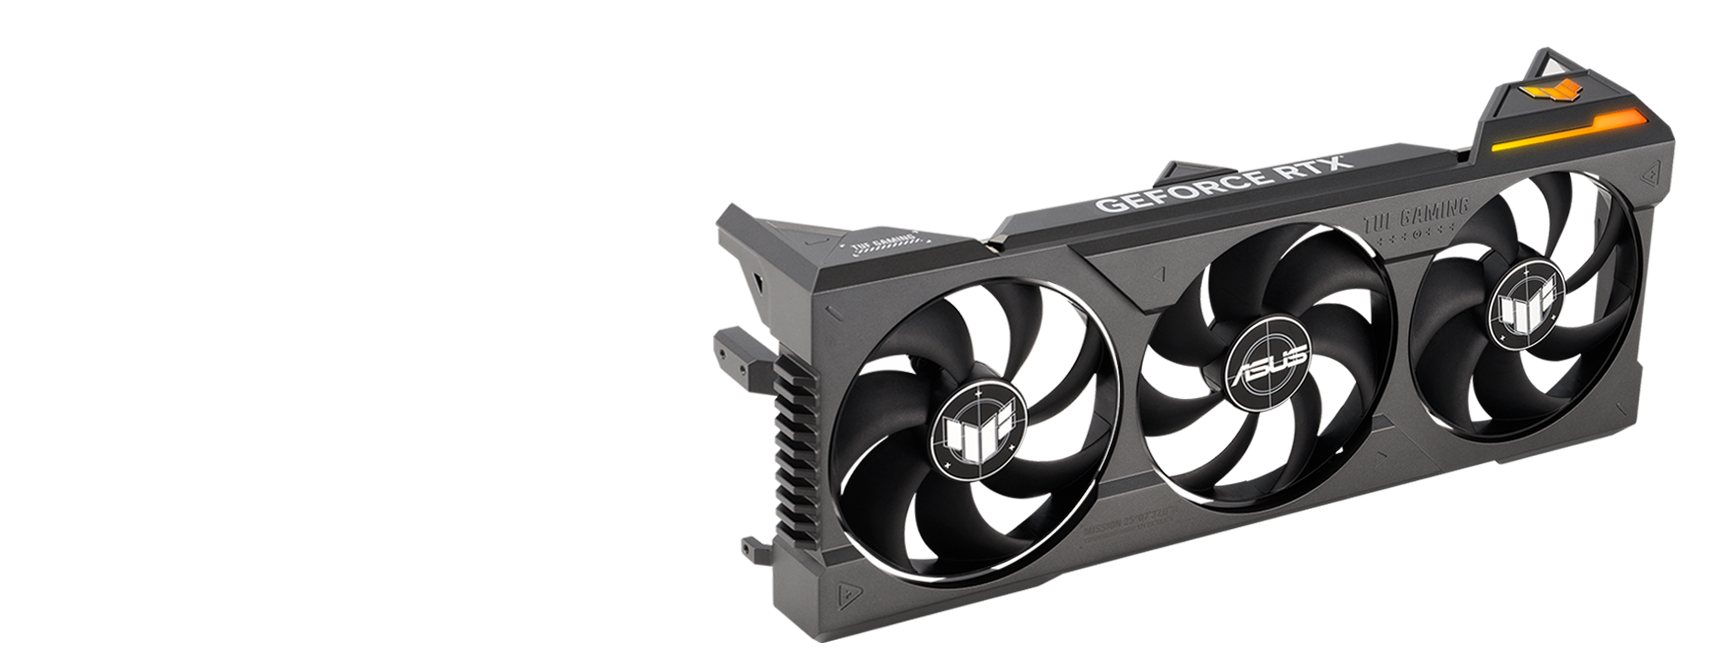 Unboxed: ASUS TUF Gaming GeForce RTX 4080 16GB GDDR6X OC Edition Graphics  Card